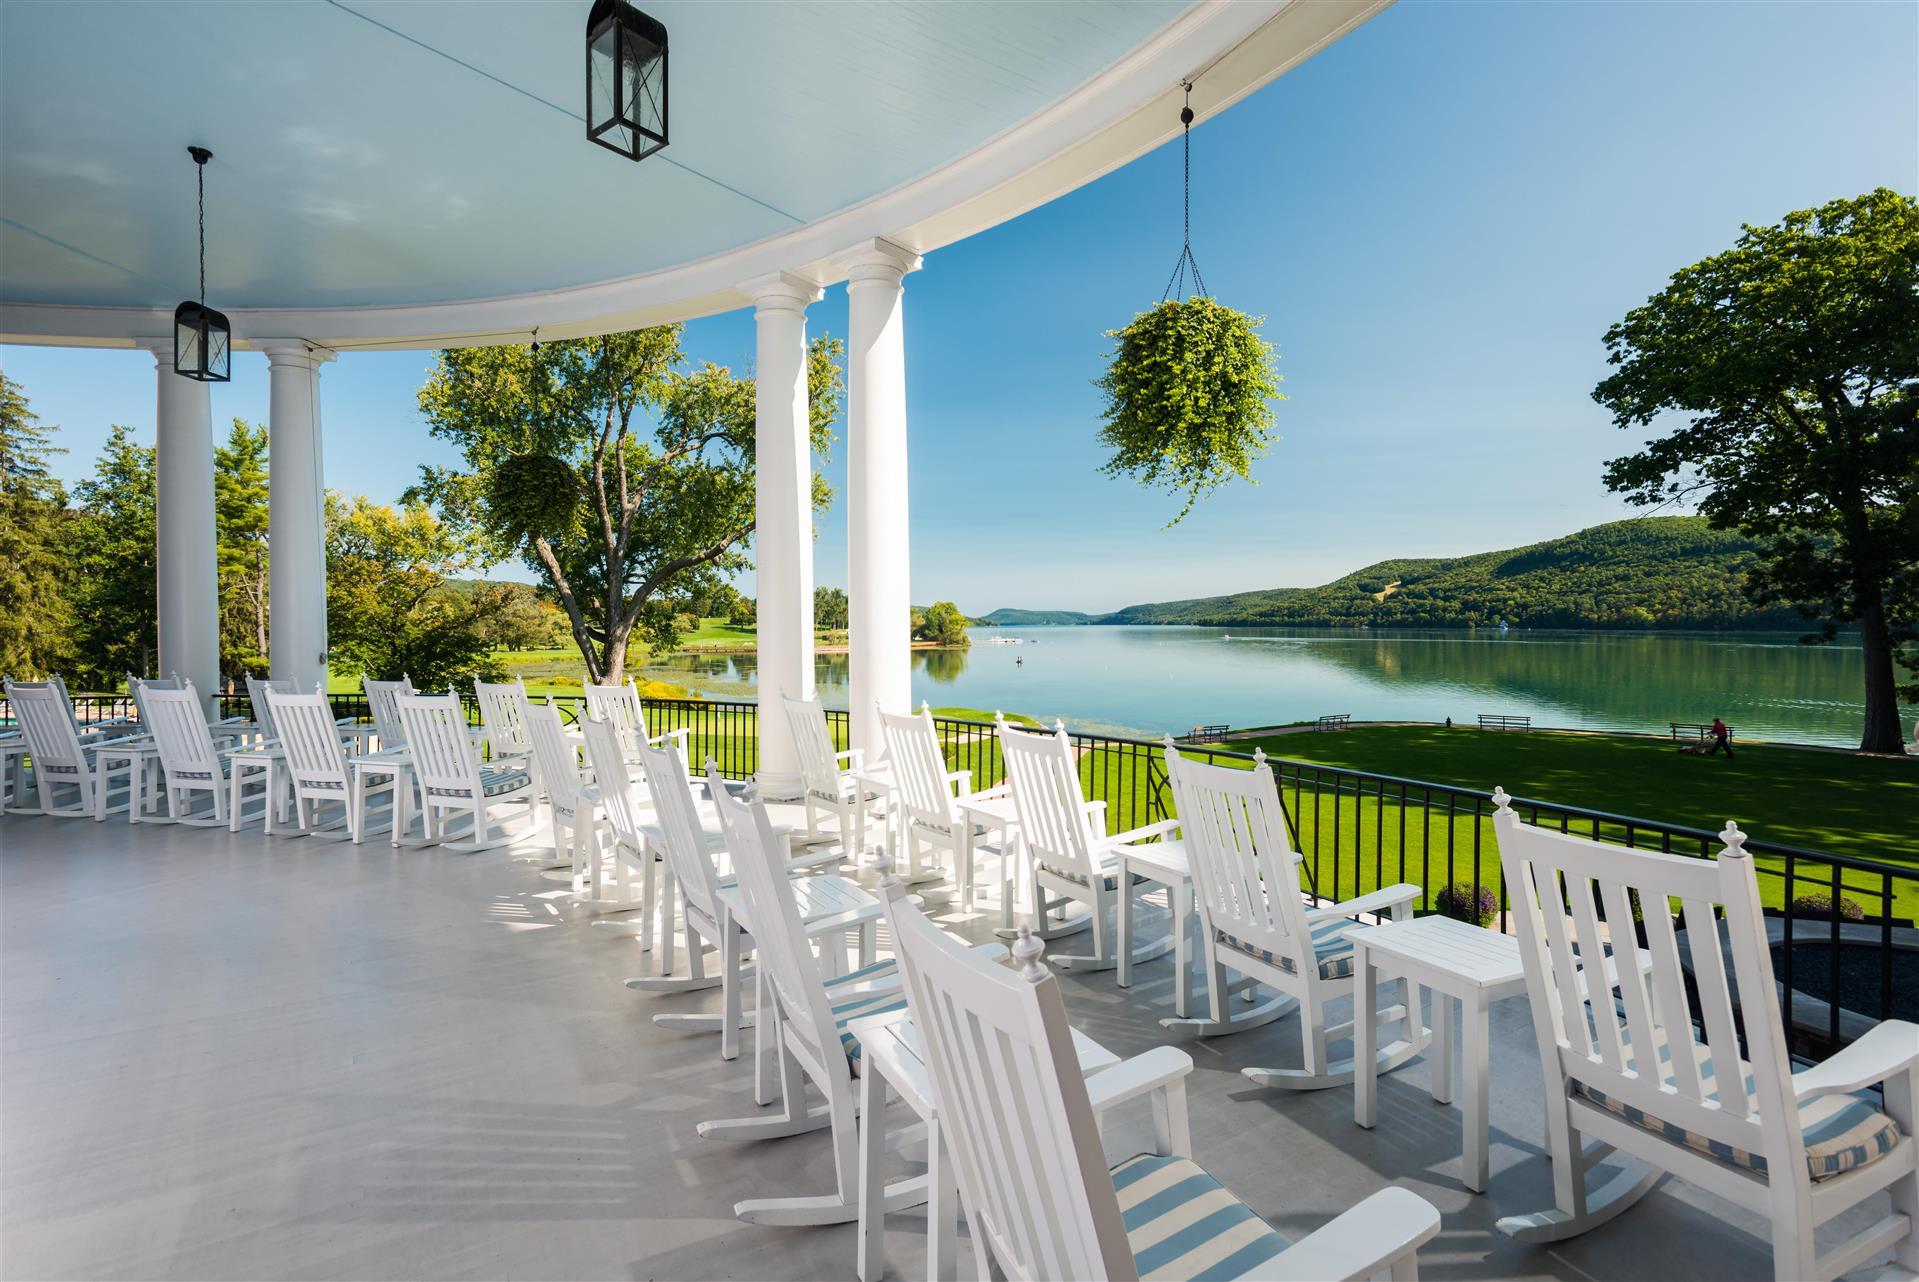 The Otesaga Resort Hotel in Cooperstown, NY